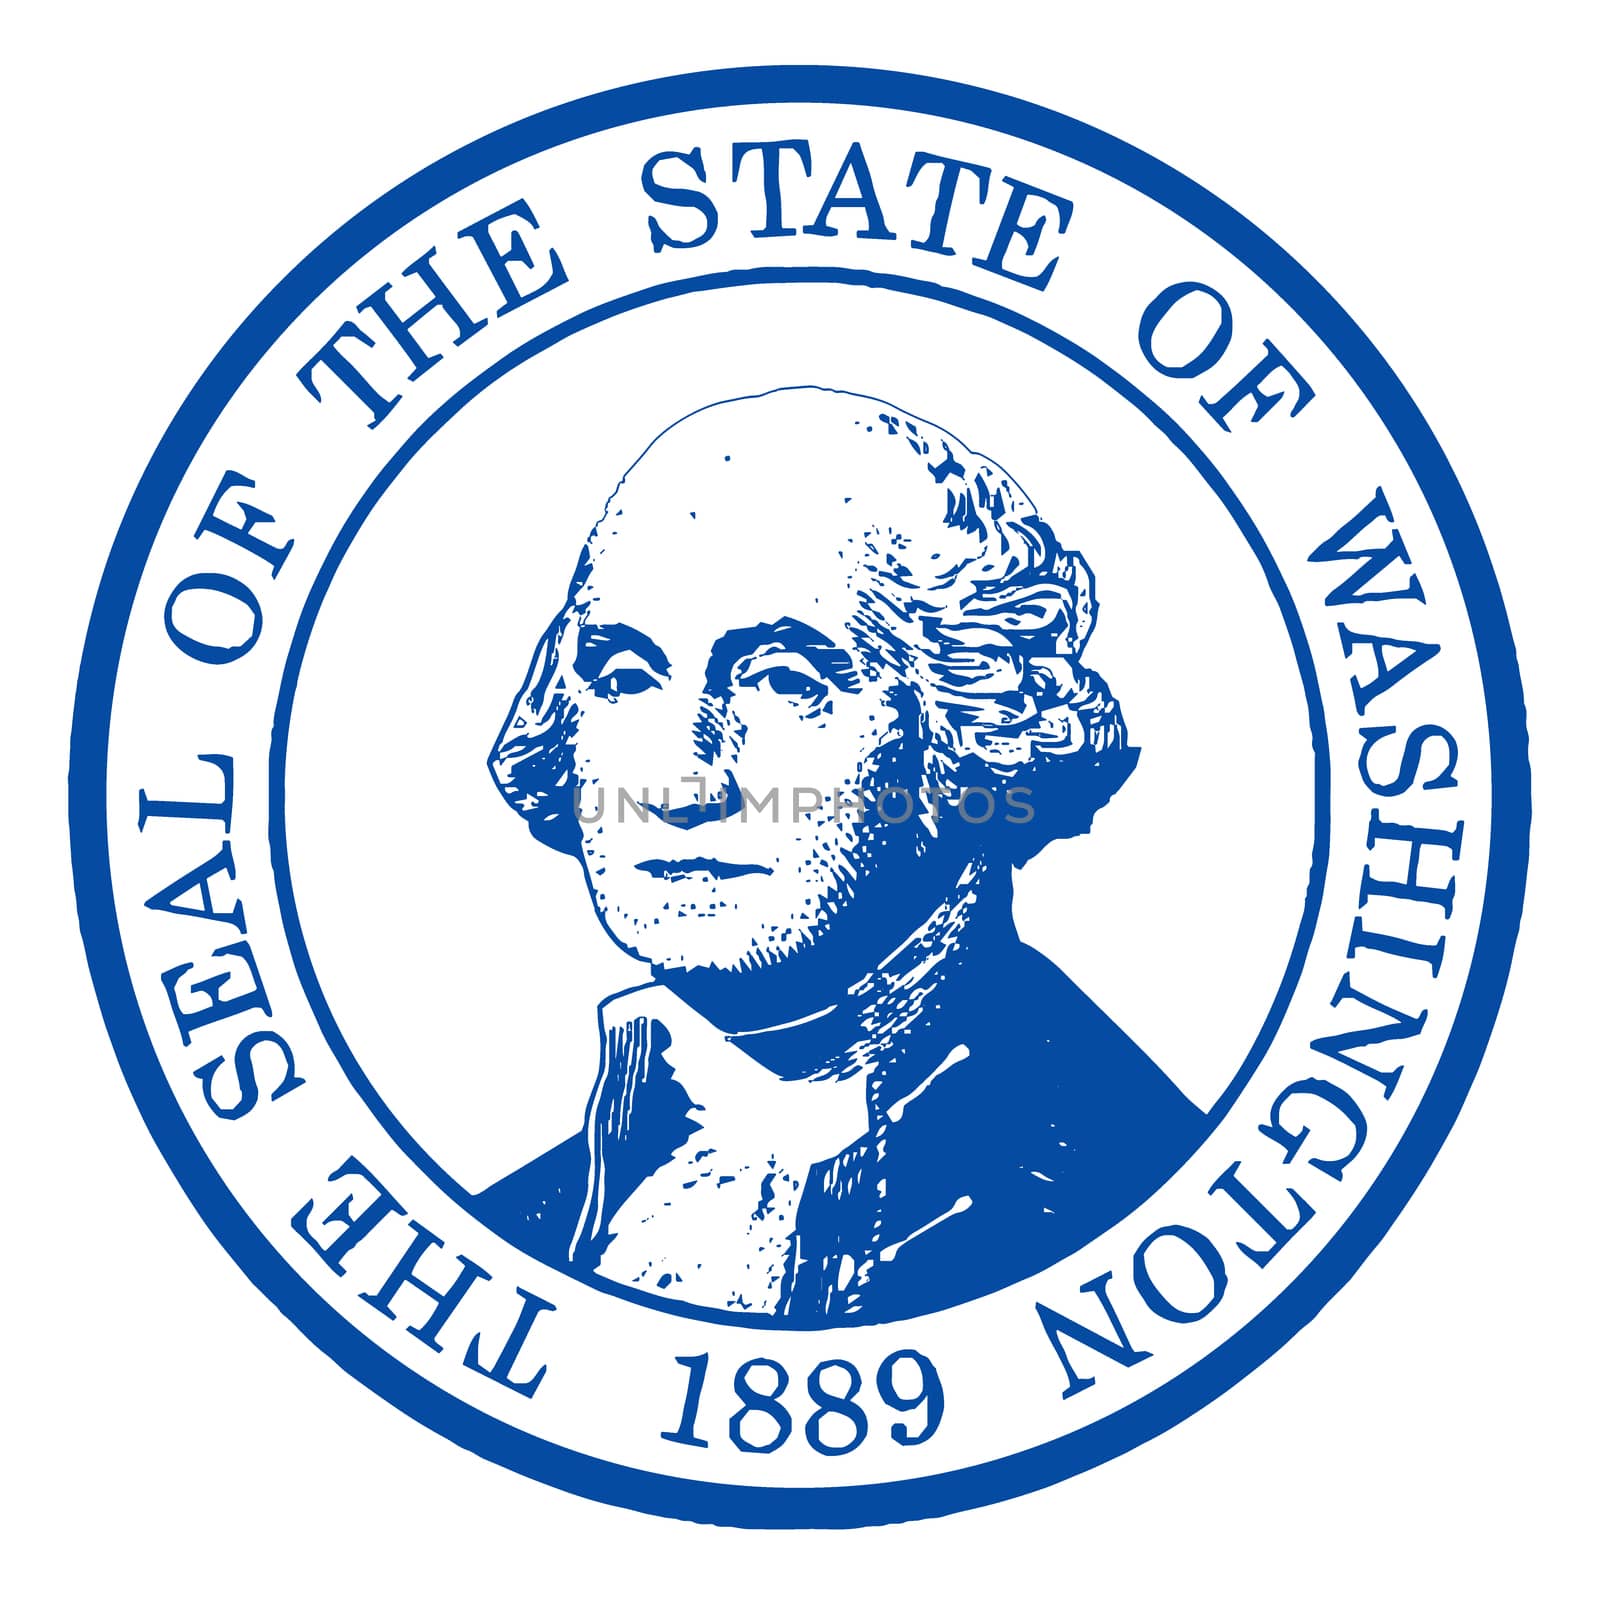 The seal of the state of Washington on a white background